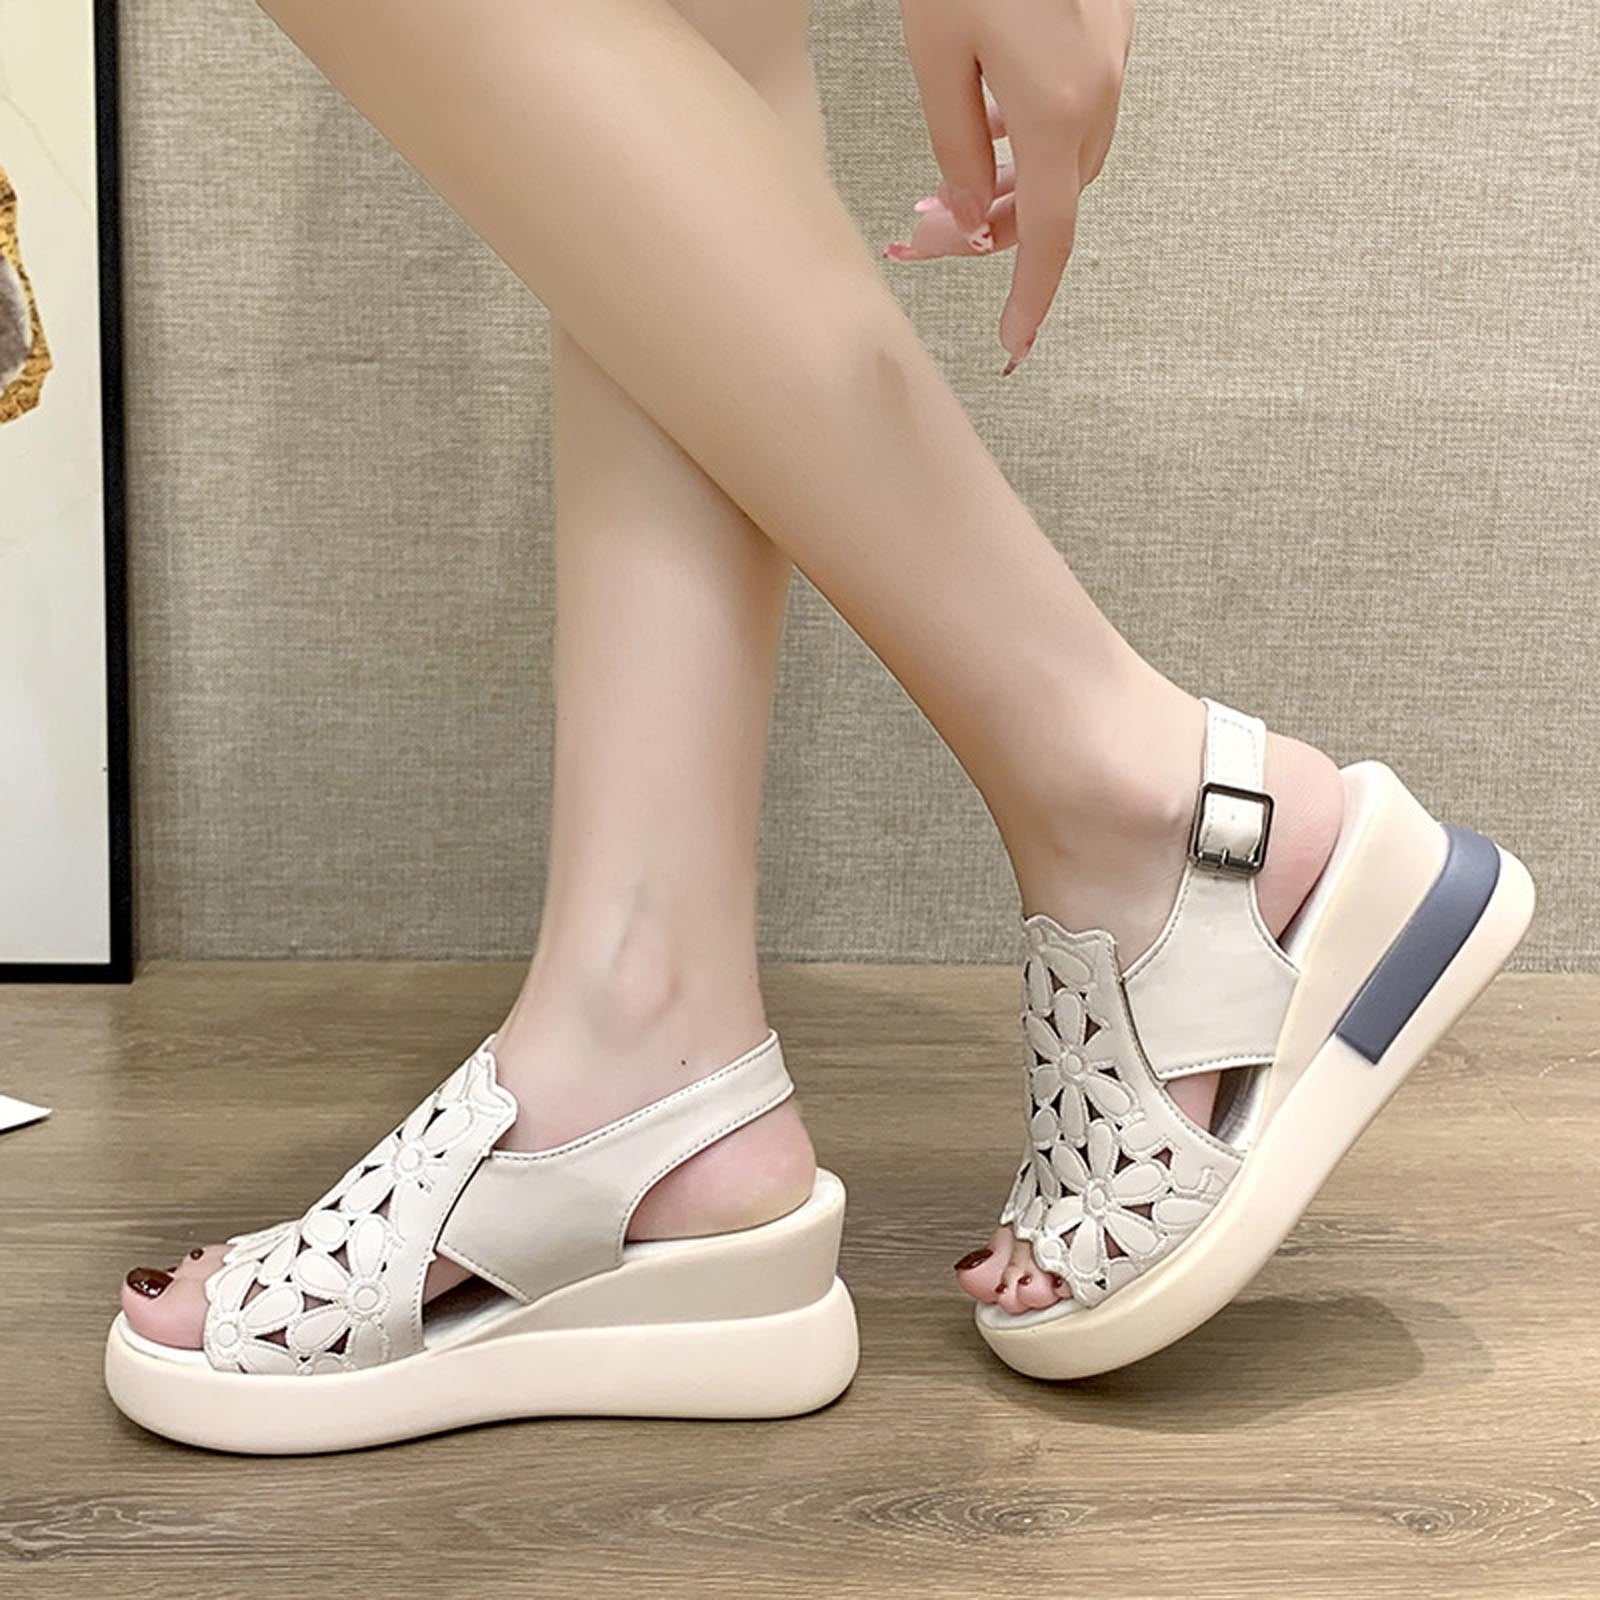 Luxury Designer Hemp Rope Wedge Sandals For Women High Quality, Comfortable  Sandals For Wide Feet XX 0295 From Mirajoy, $68.74 | DHgate.Com